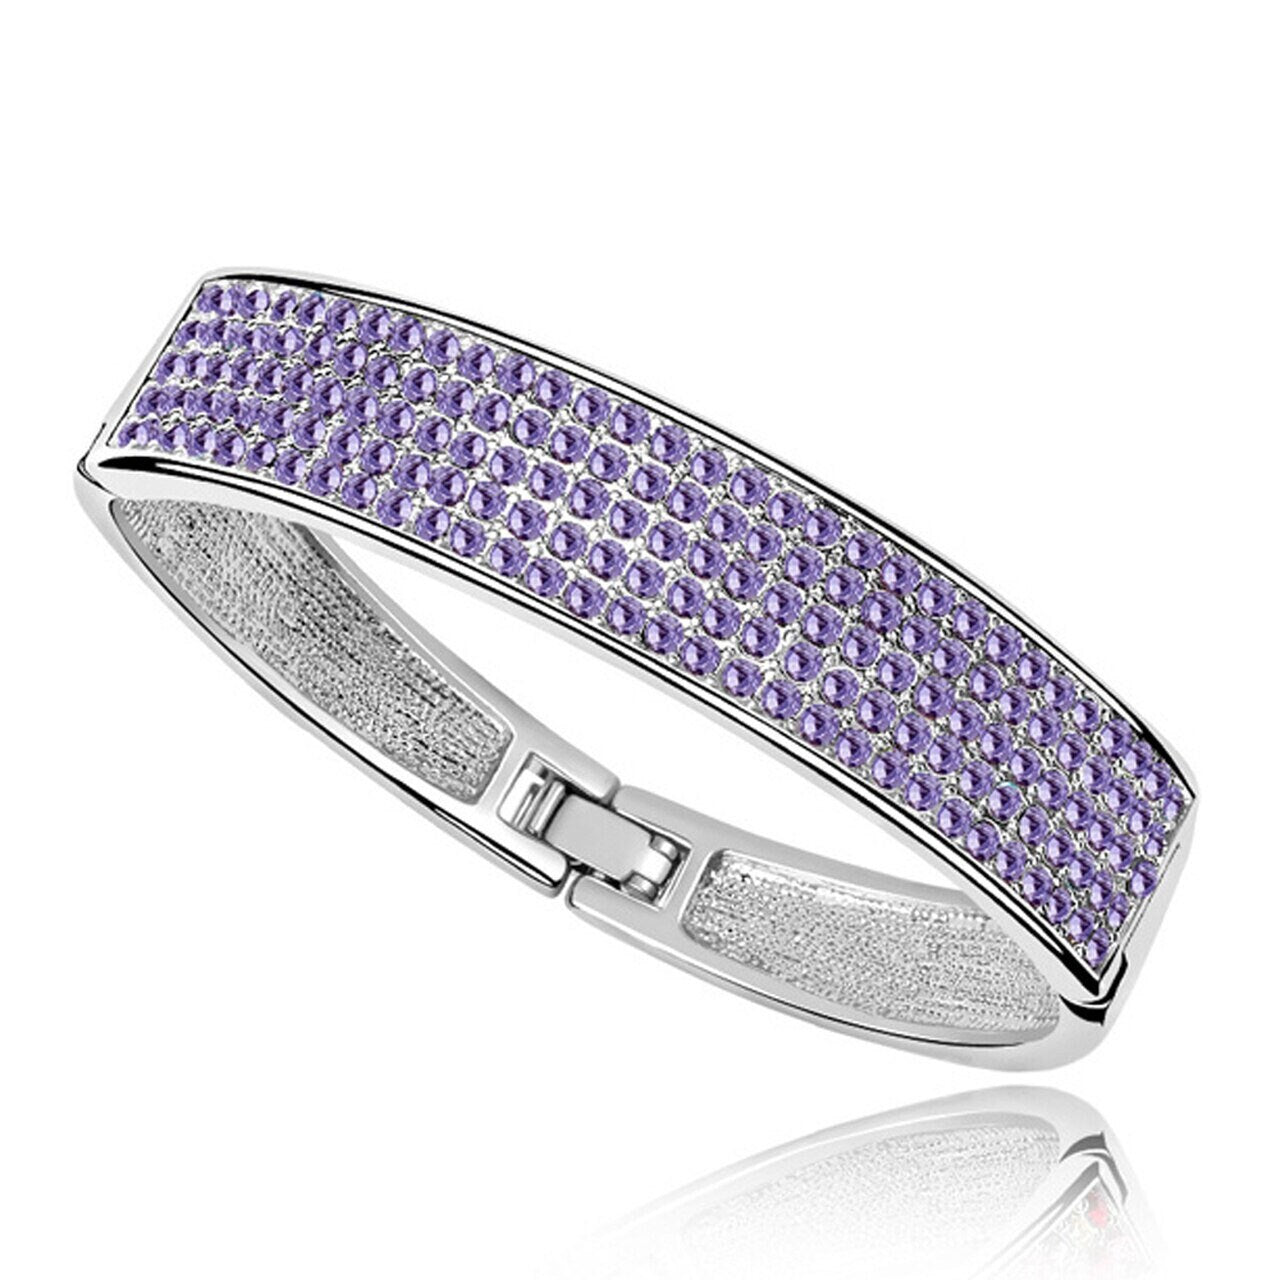 Dazzling Crystal Diamante Clip on Cuff Bangle Bracelet in clear blue pink and purple